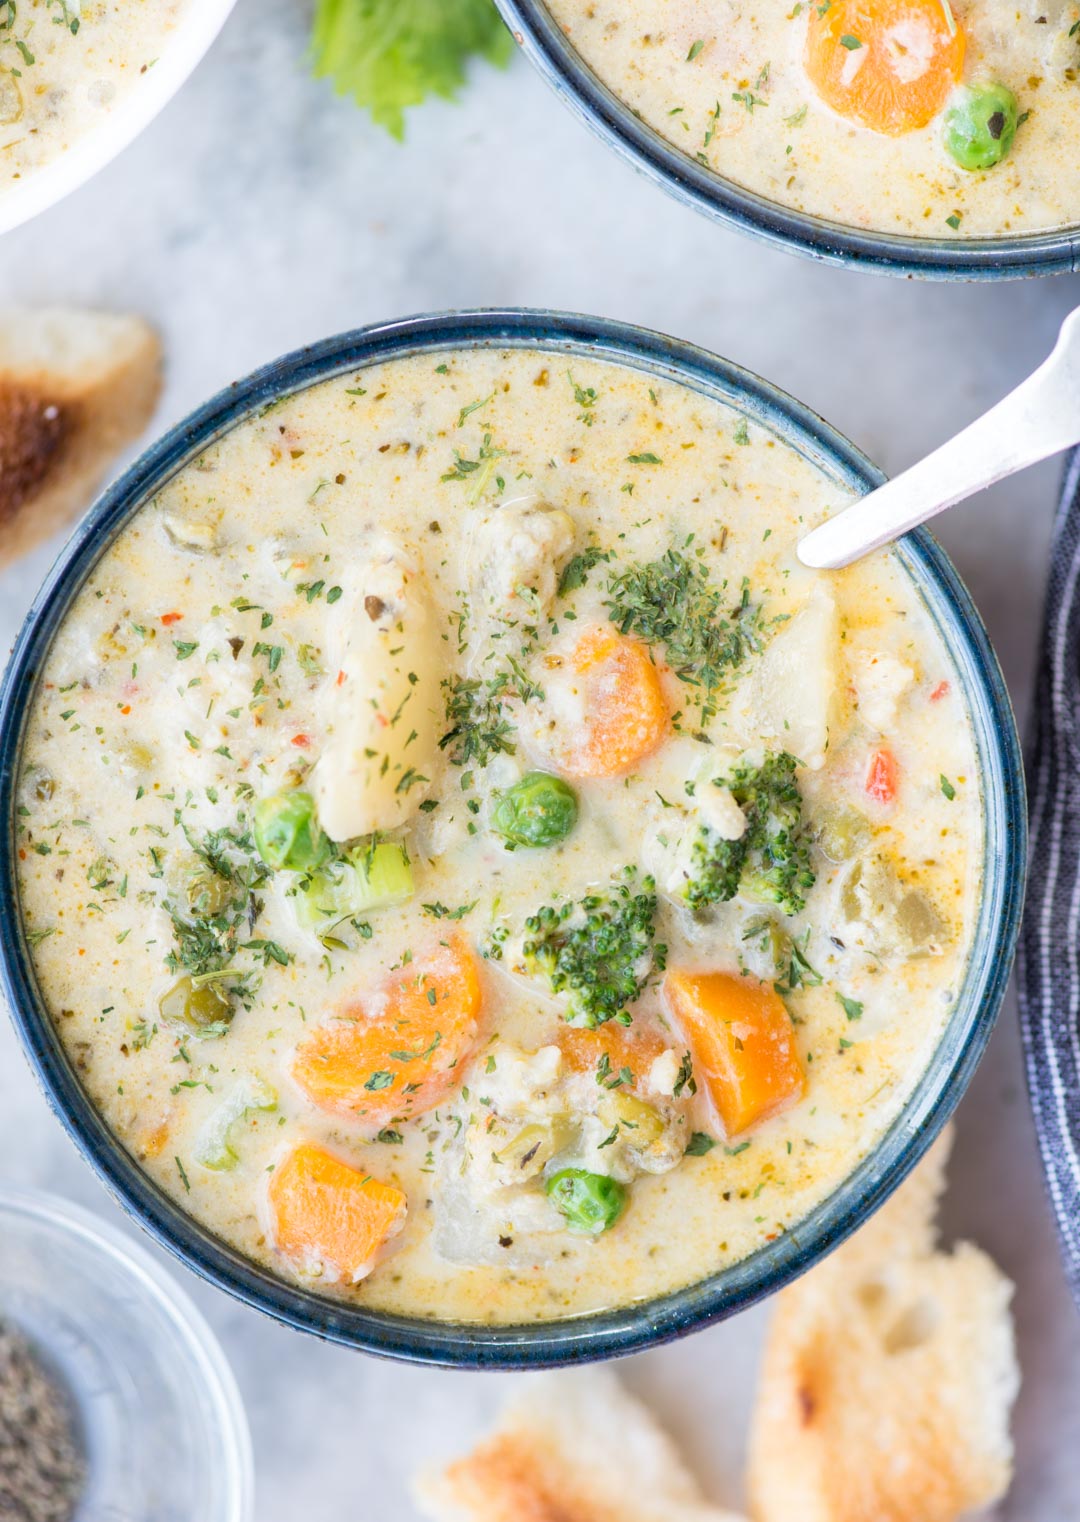 Creamy Vegetable Soup made with loads of vegetable is healthy and gluten-free. The soup has the richness from Parmesan Cheese and is really filling. There are instructions to make this soup both in the Instant Pot and Stovetop.